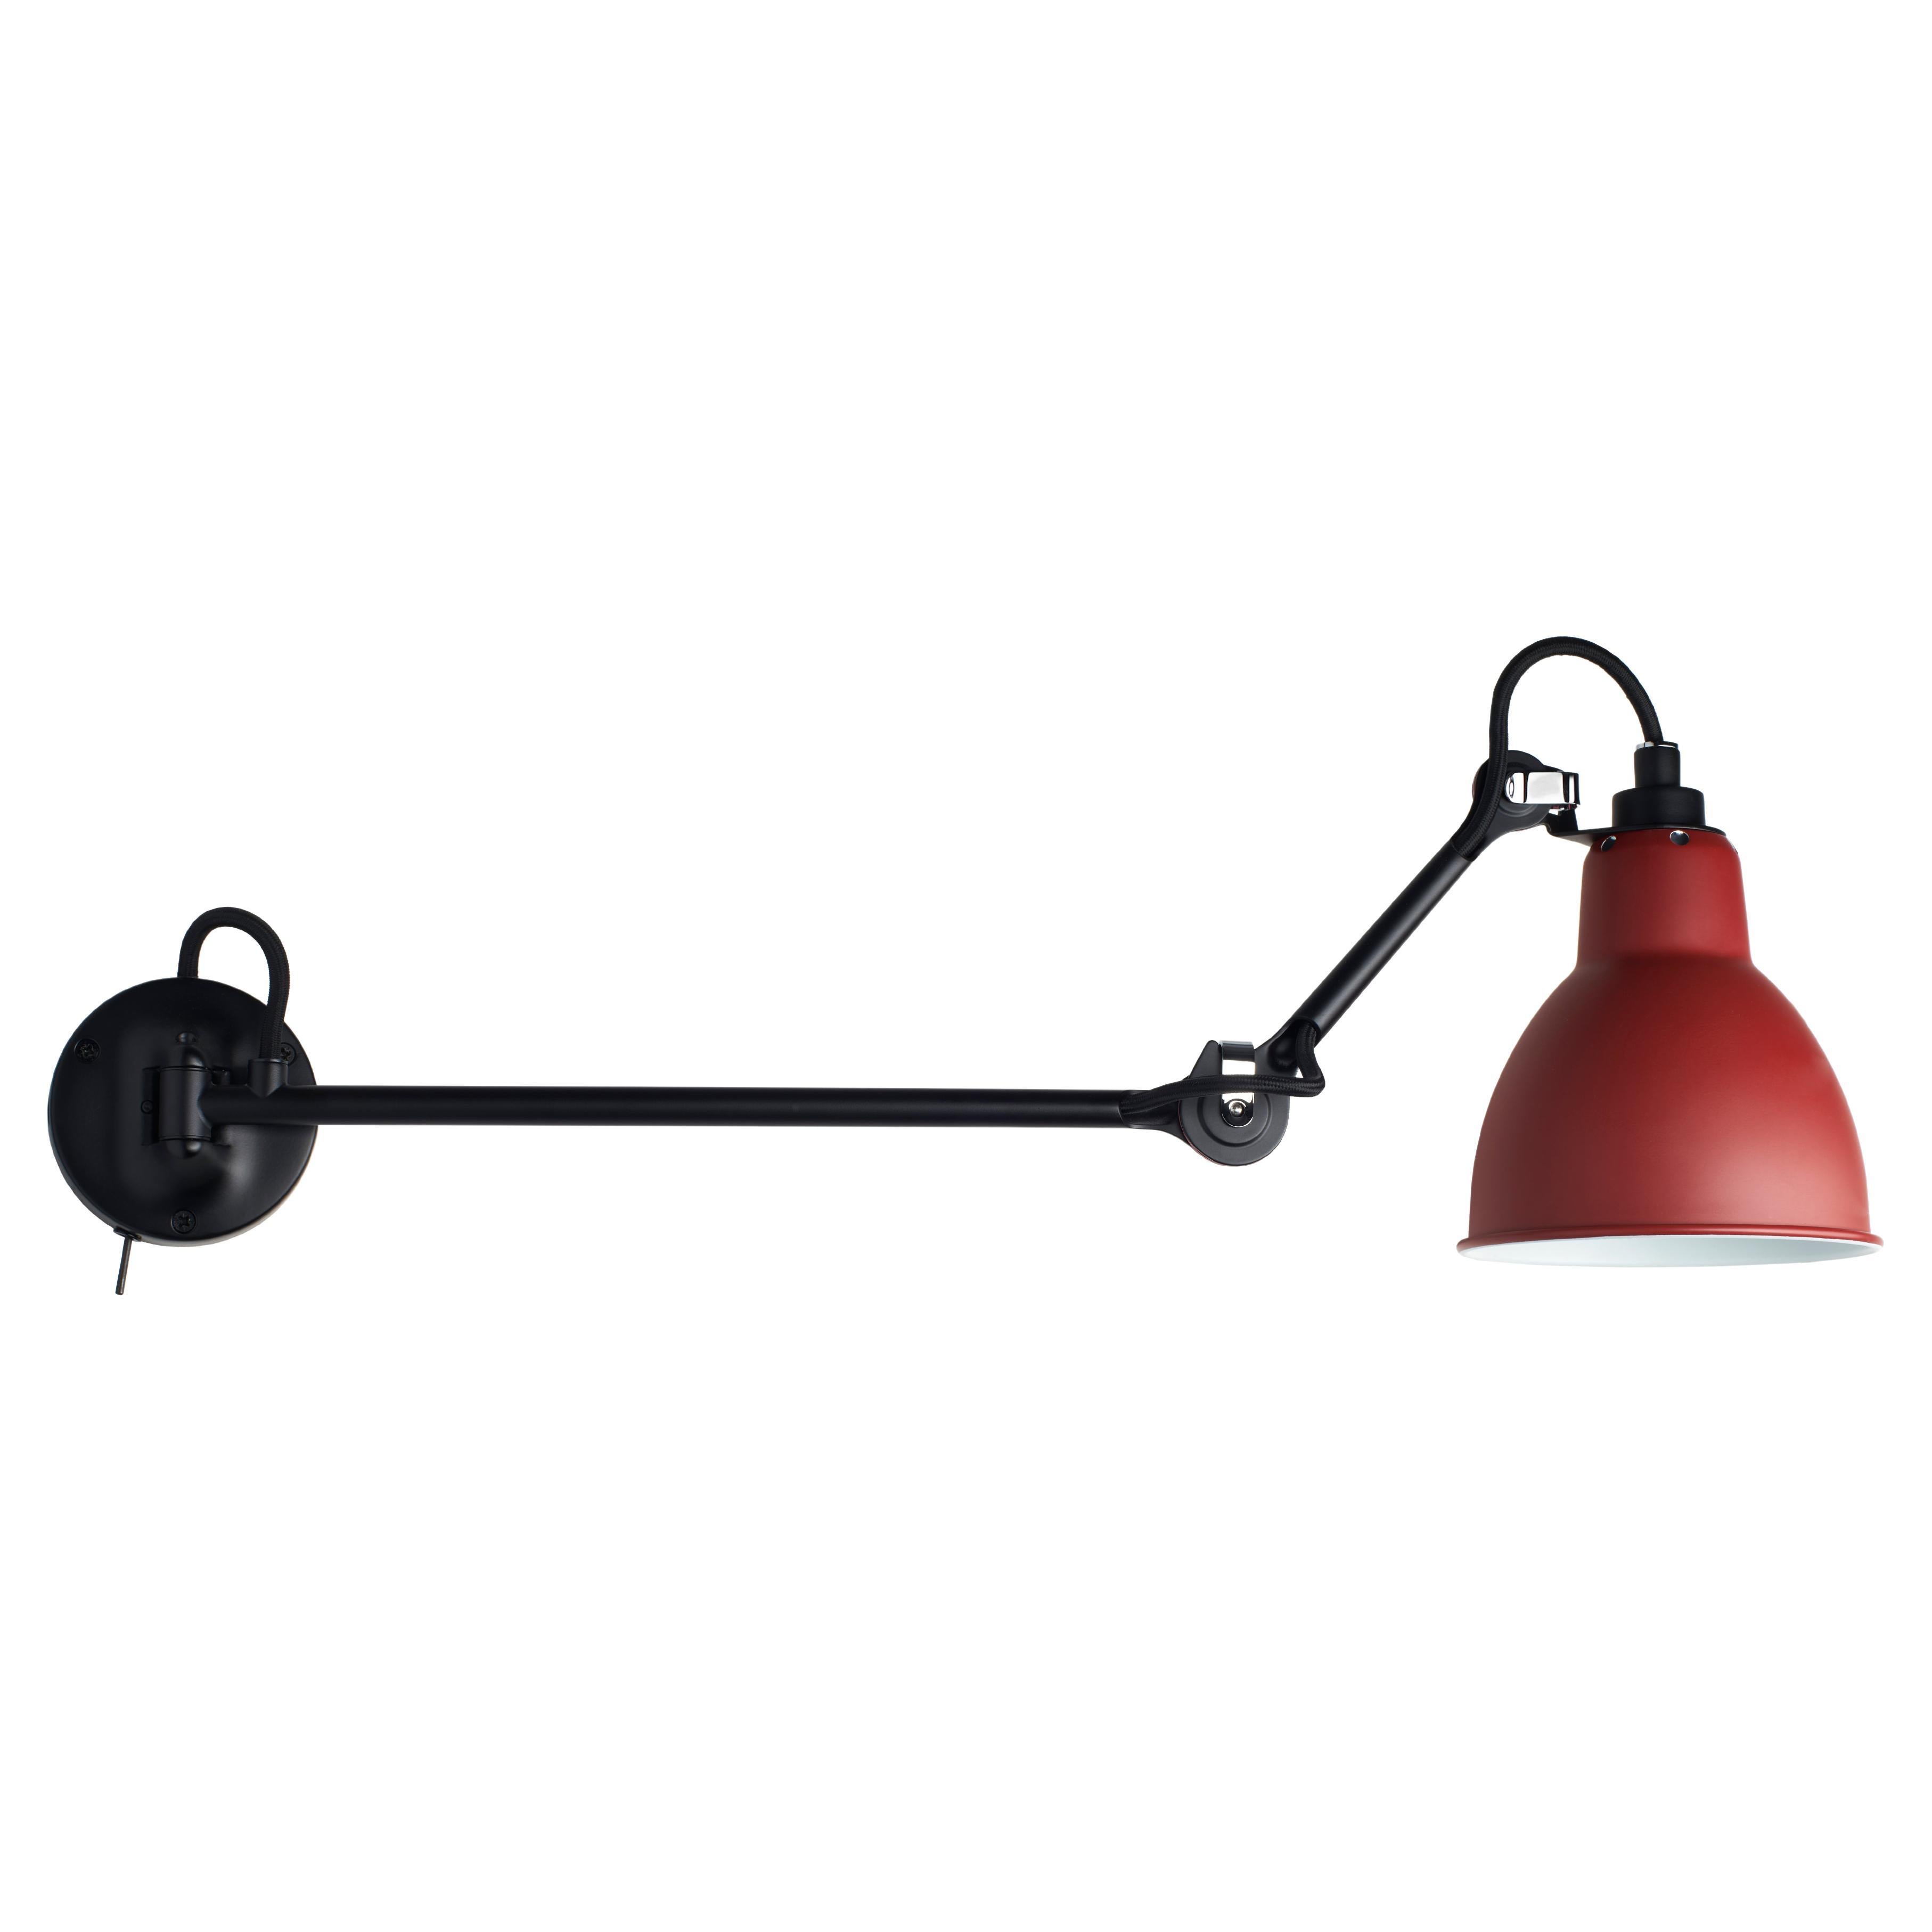 DCW Editions La Lampe Gras N°204 L40 SW Wall Lamp in Black Steel Arm & Red Shade For Sale